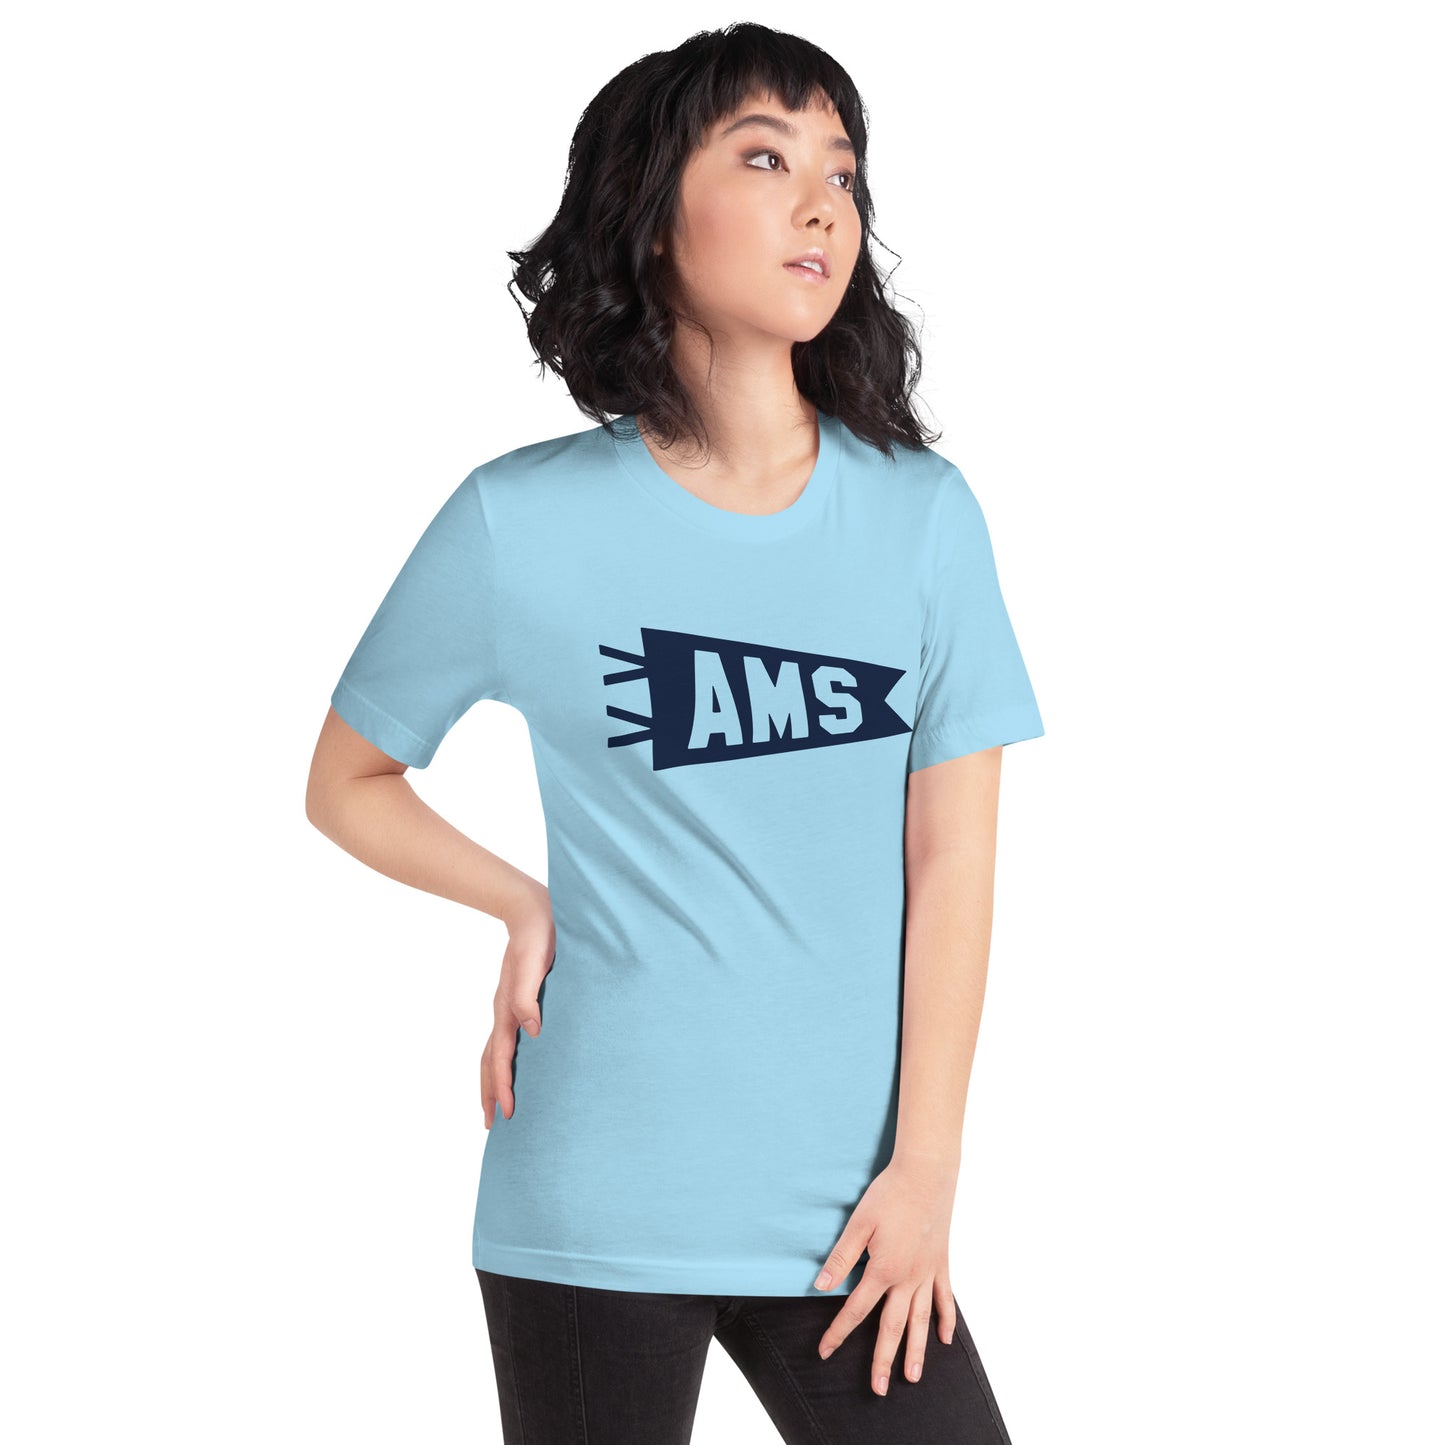 Airport Code T-Shirt - Navy Blue Graphic • AMS Amsterdam • YHM Designs - Image 07